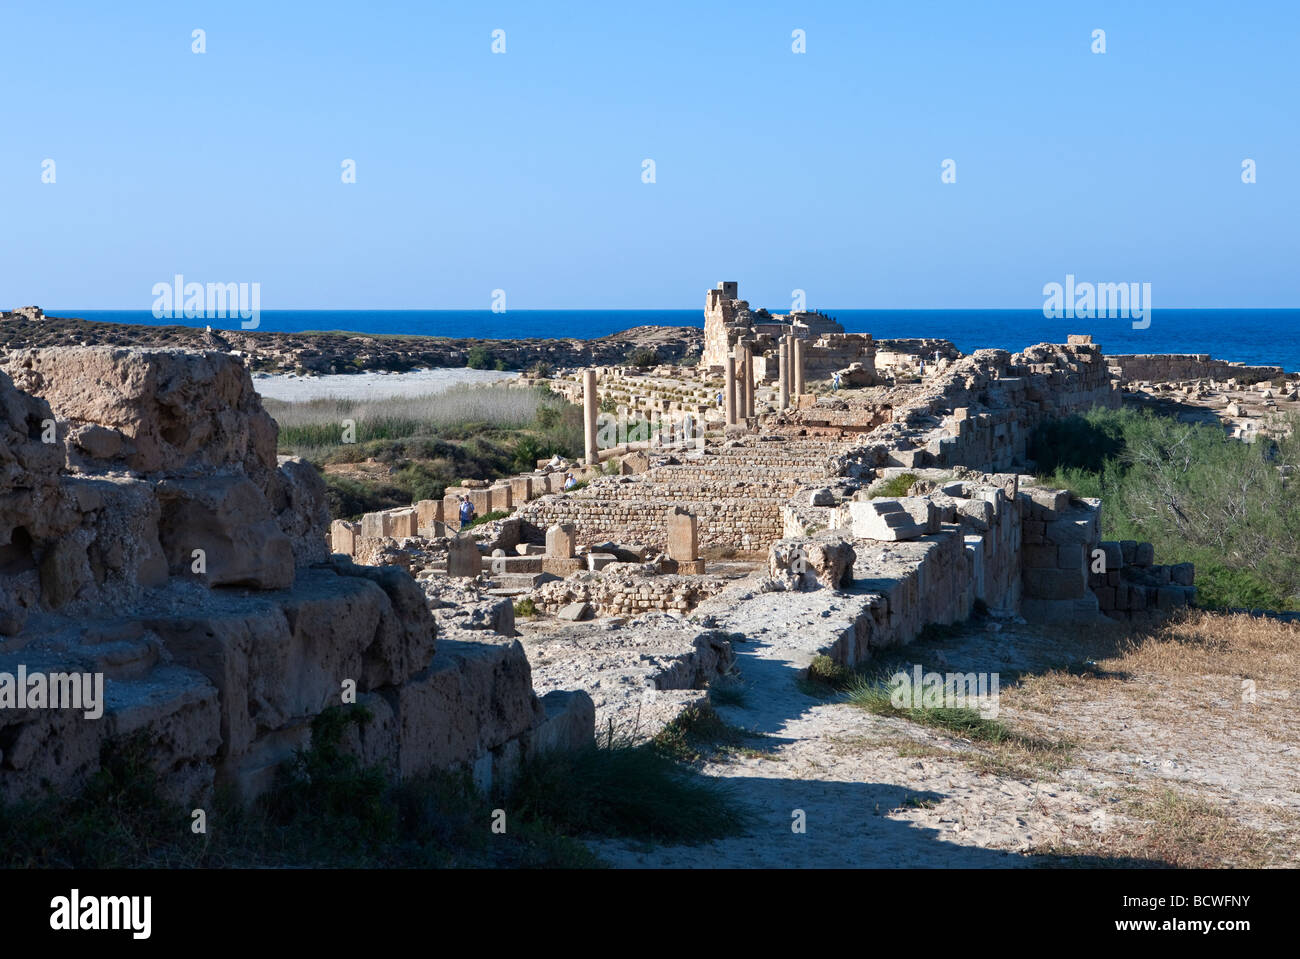 Libya the archaeological site of Leptis Magna Stock Photo